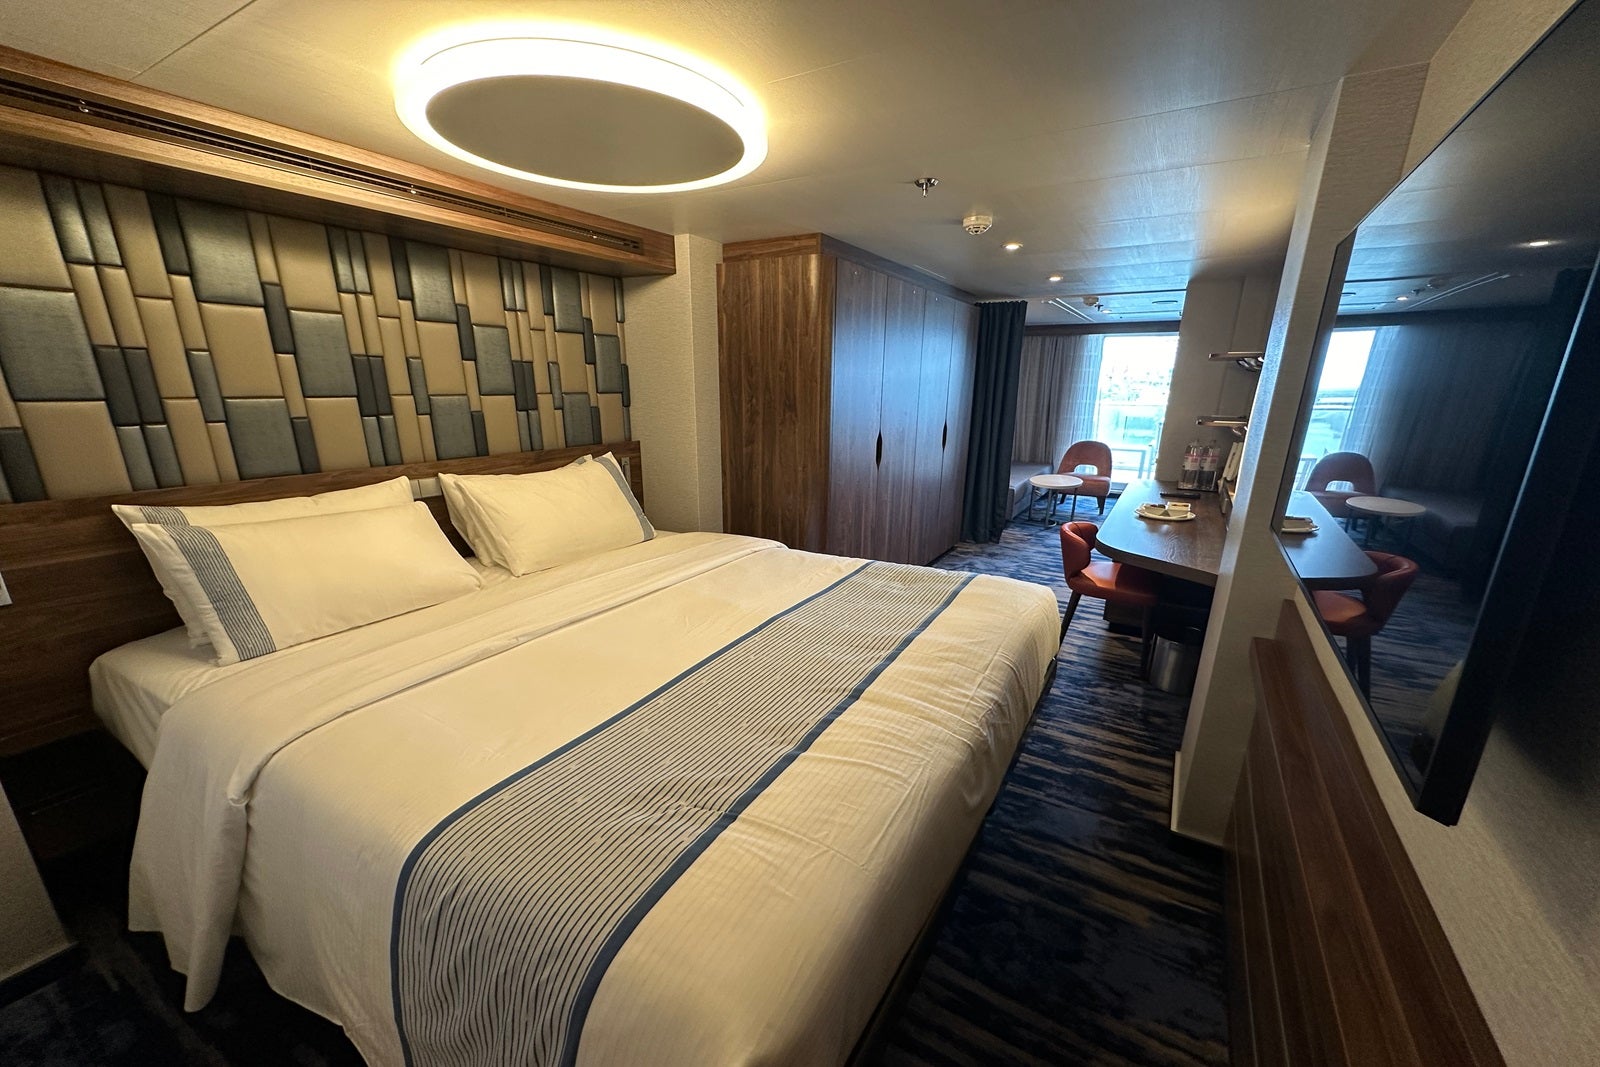 carnival cruise ships pictures